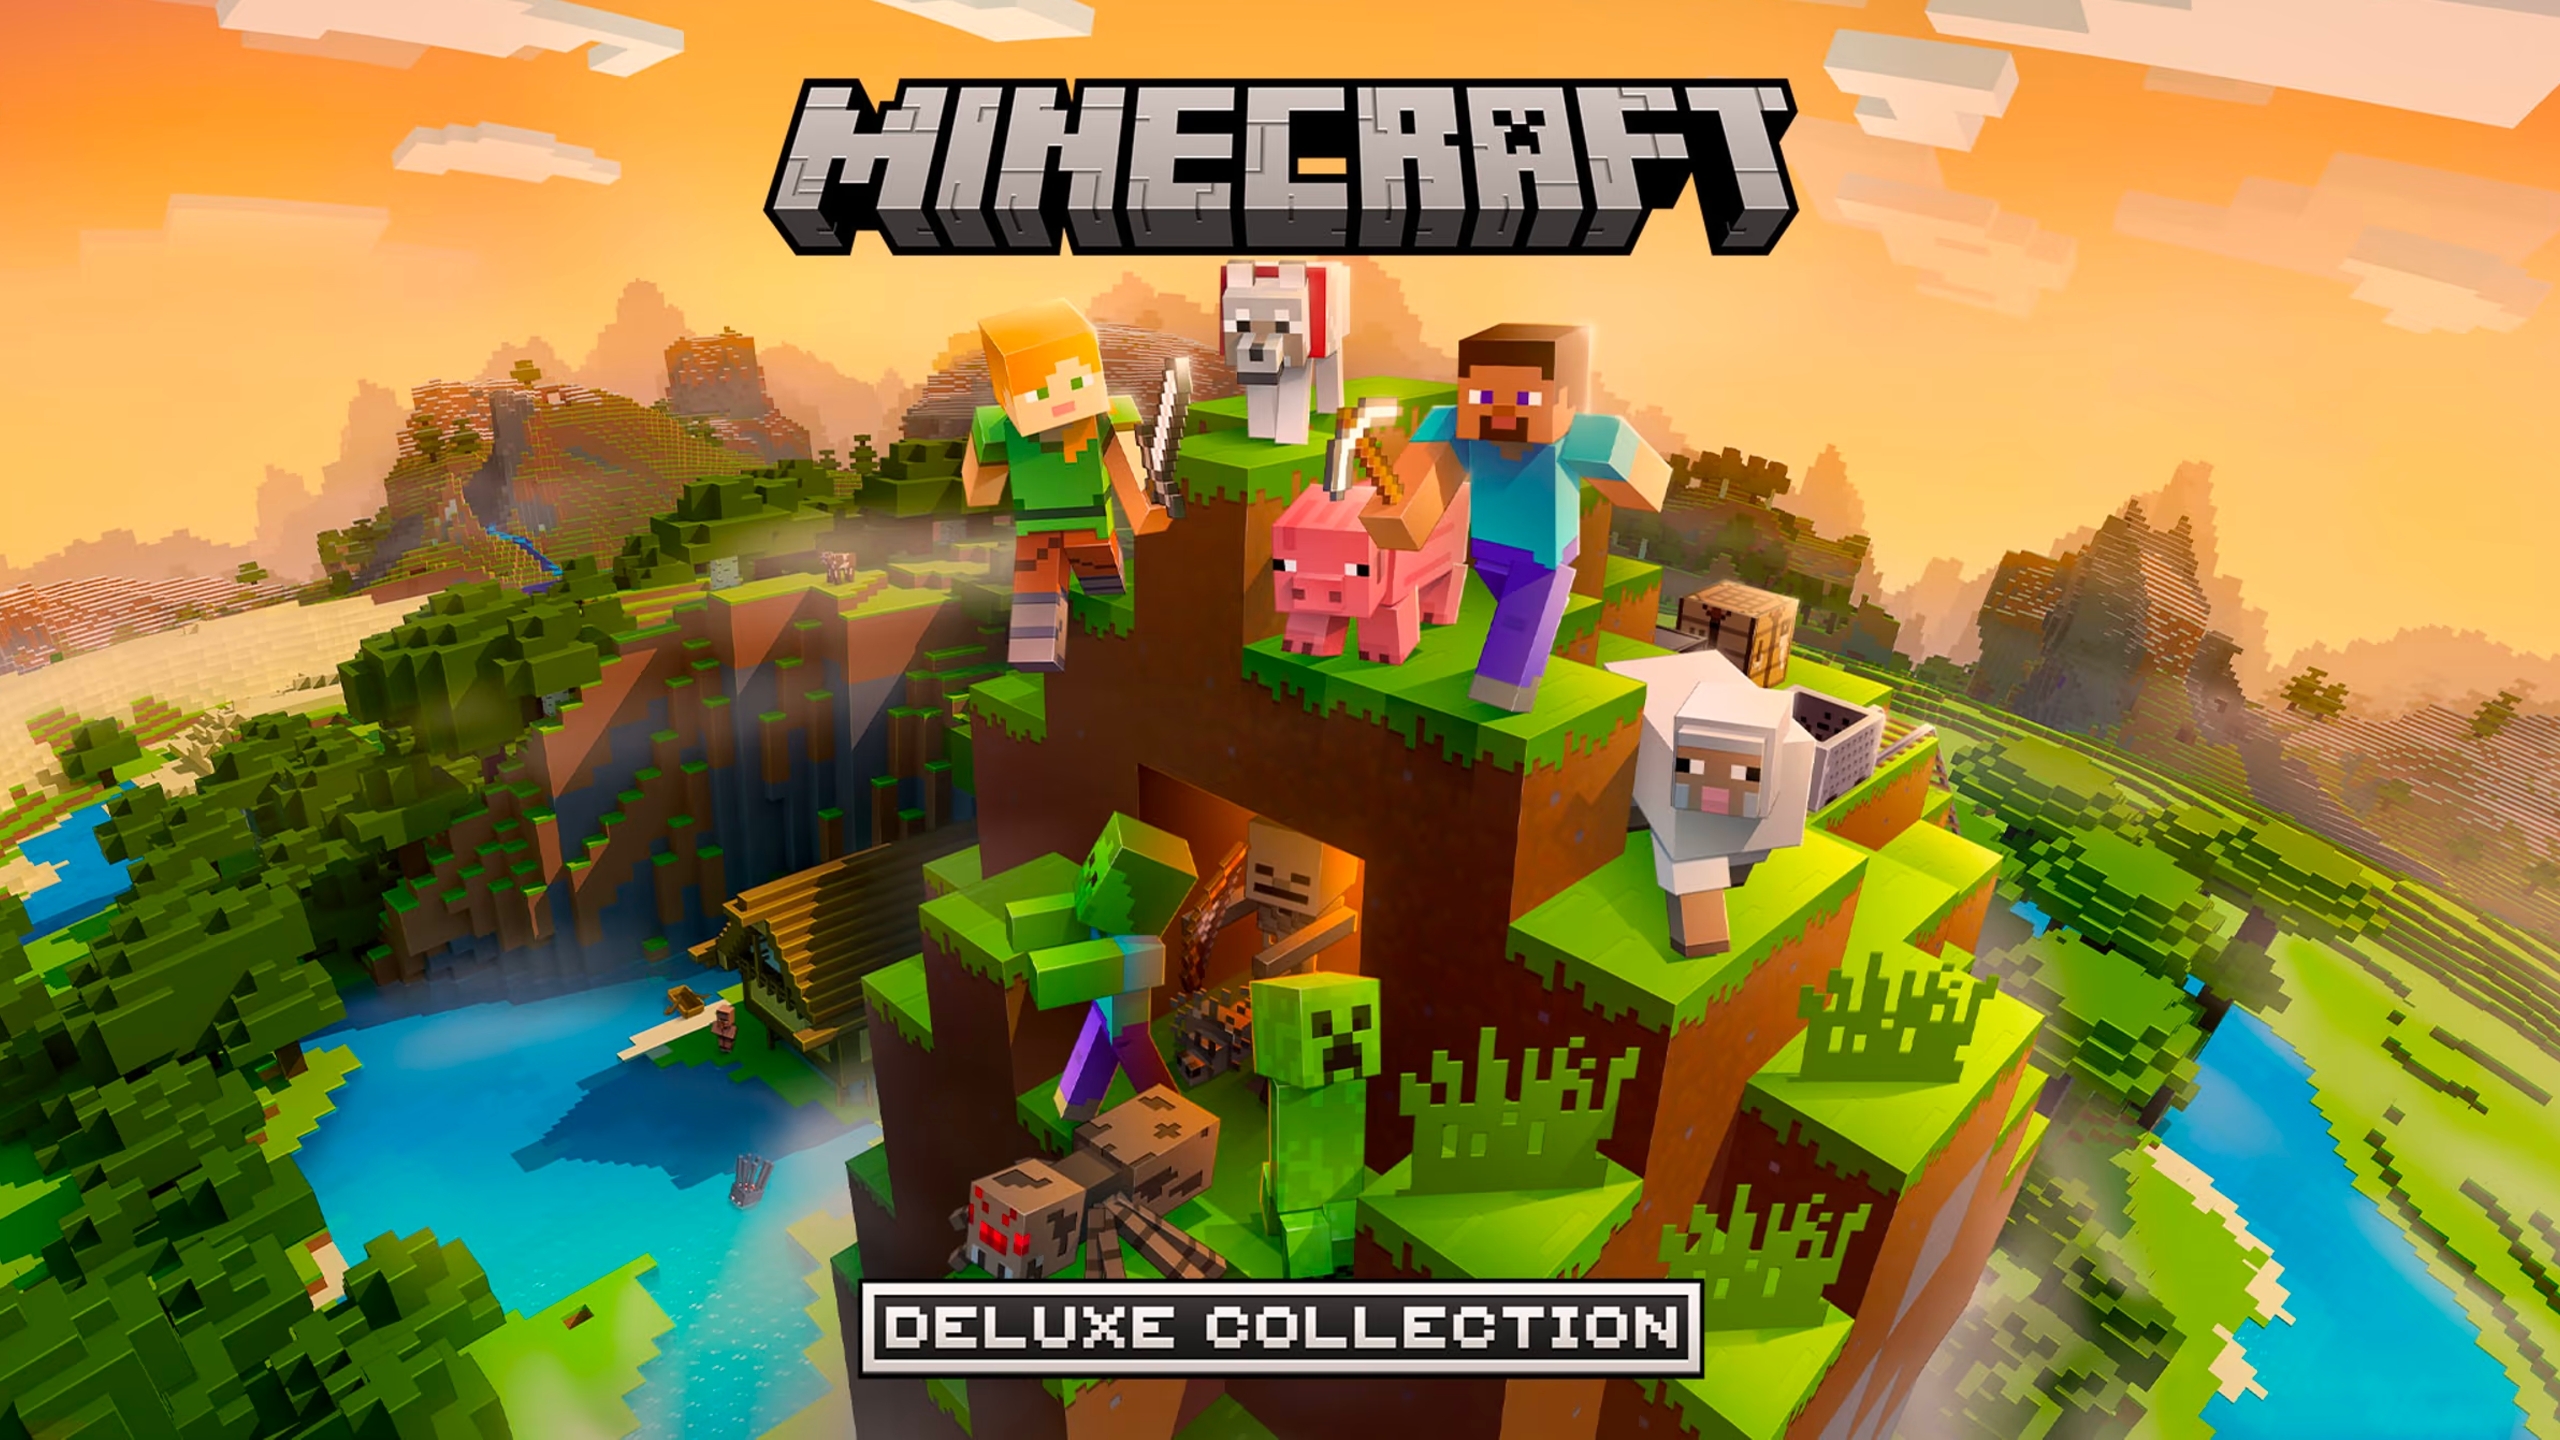 https://gaming-cdn.com/images/products/14986/orig/minecraft-java-bedrock-edition-deluxe-collection-deluxe-collection-pc-jeu-microsoft-store-europe-cover.jpg?v=1696925849